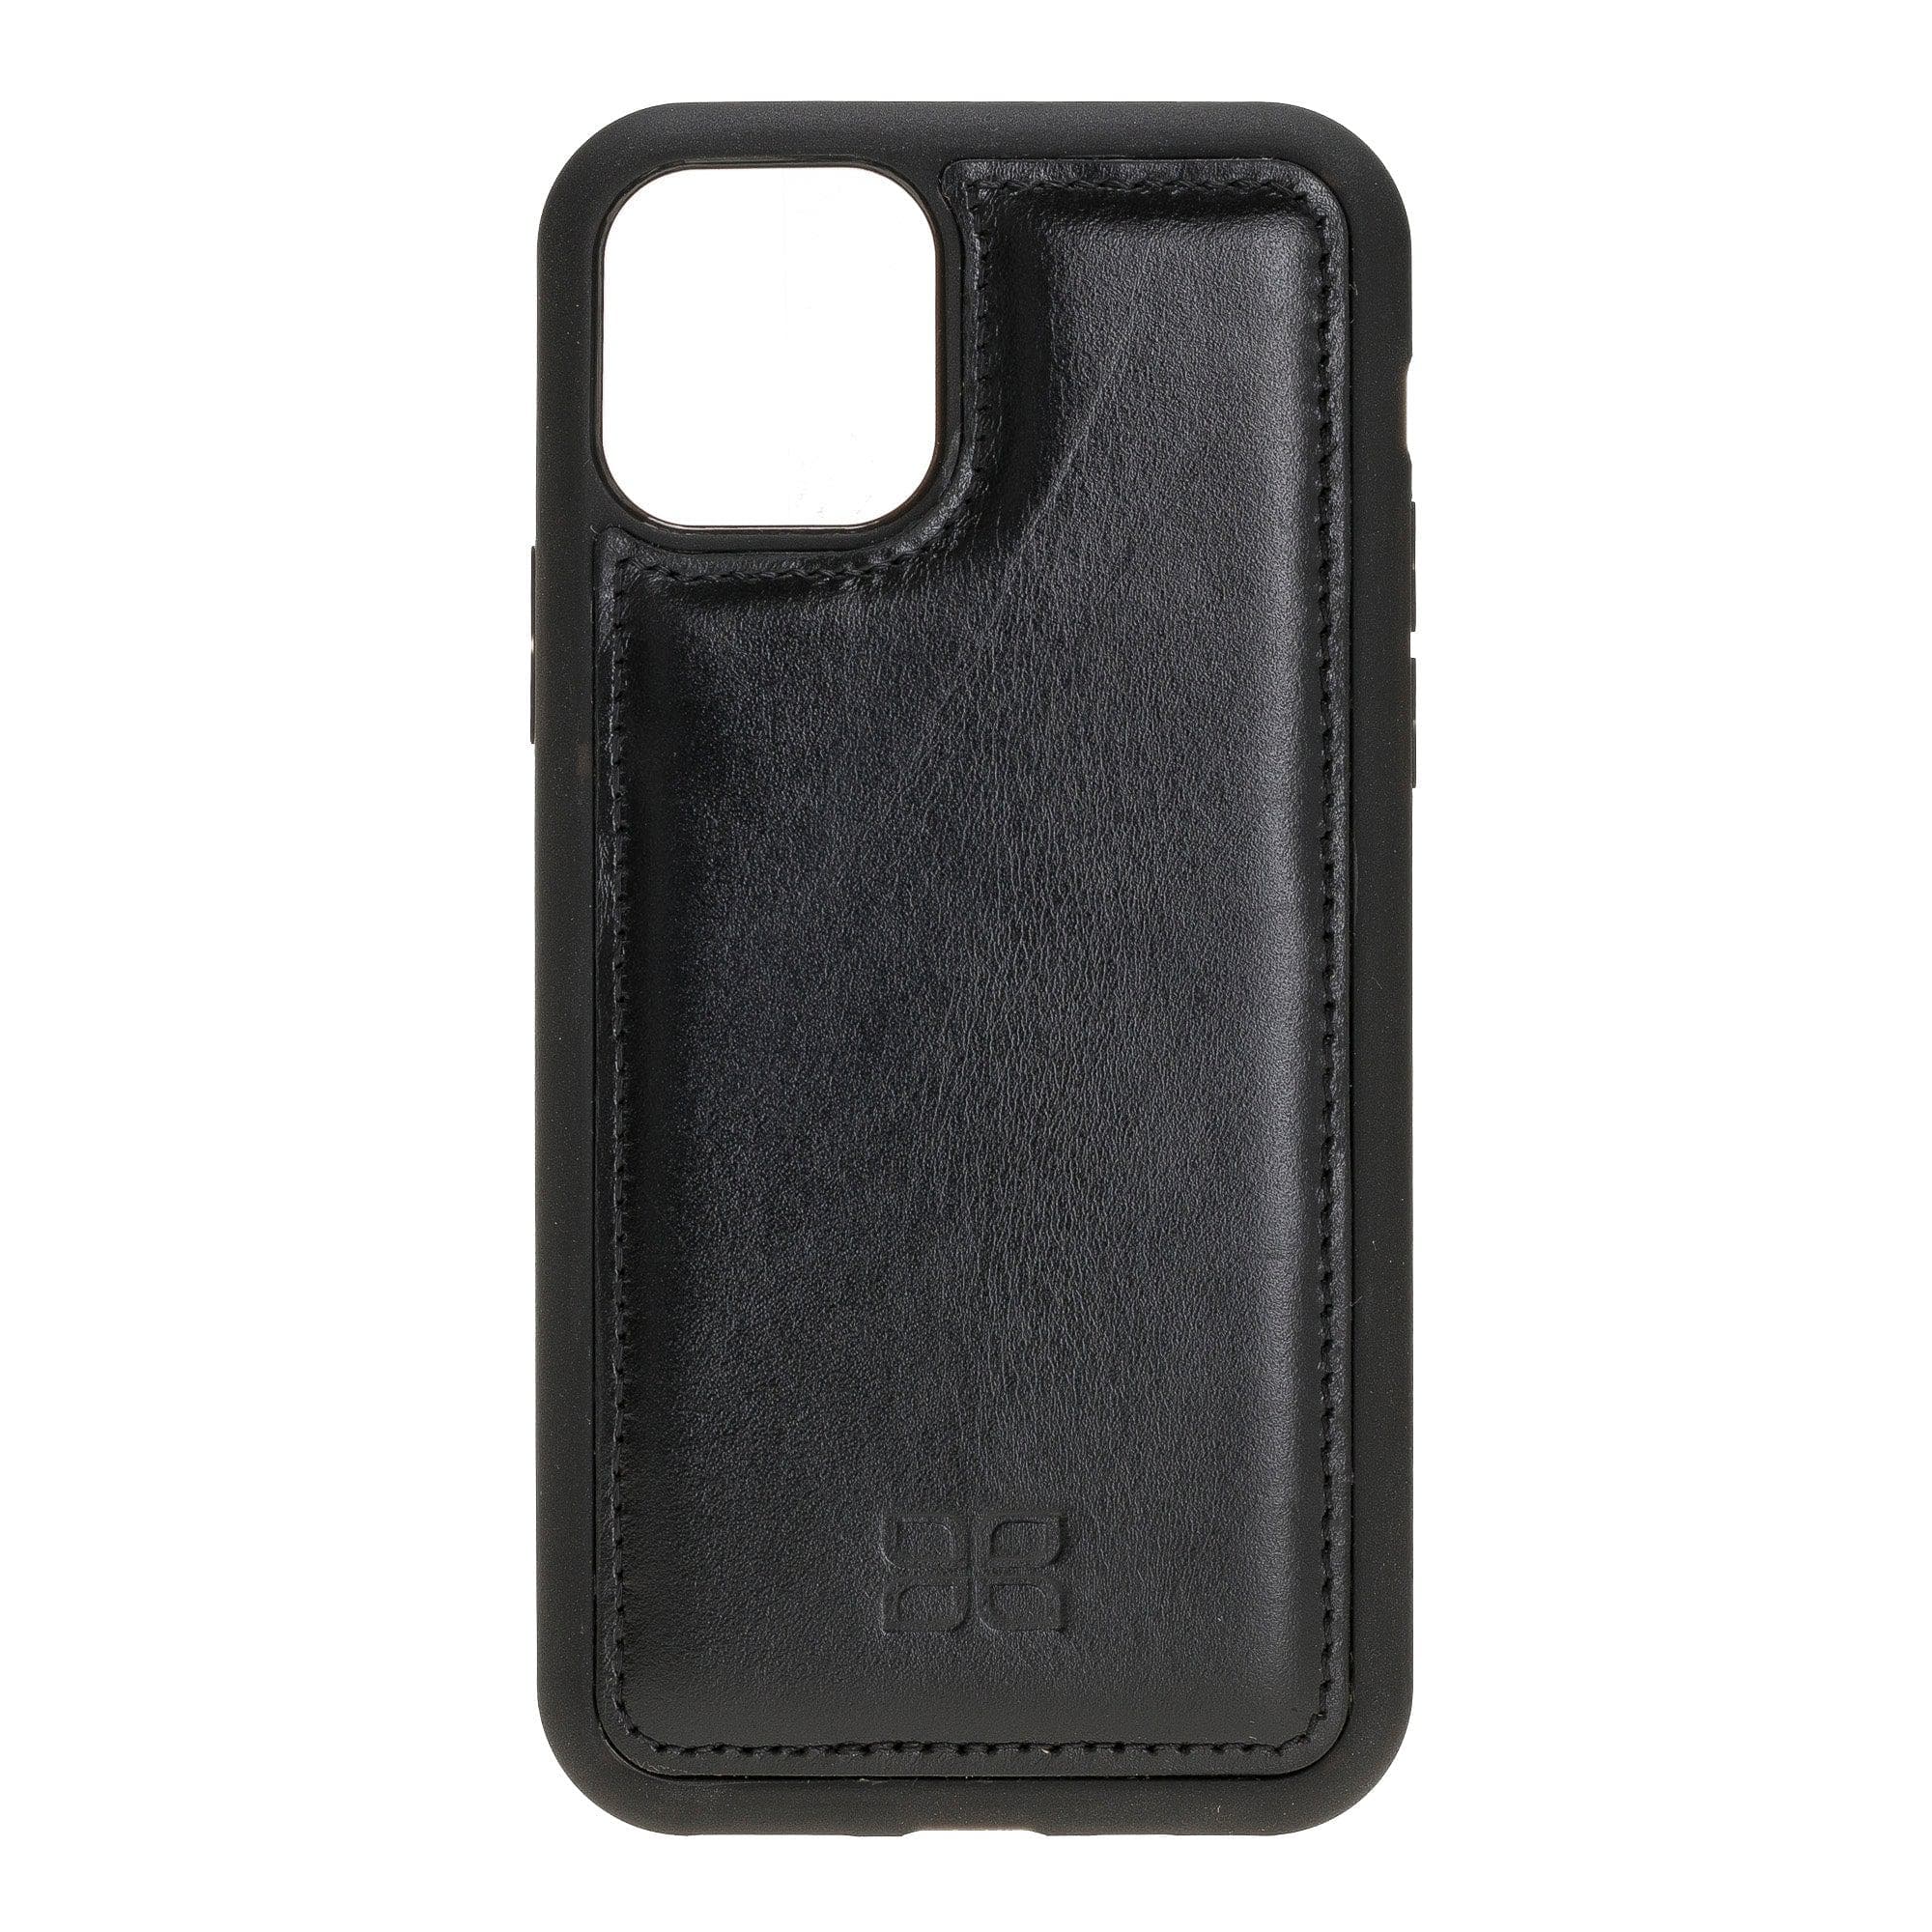 Flex Cover Leather Back Cover Case for Apple iPhone 11 Series iPhone 11 Pro 5.8" / Black Bouletta LTD